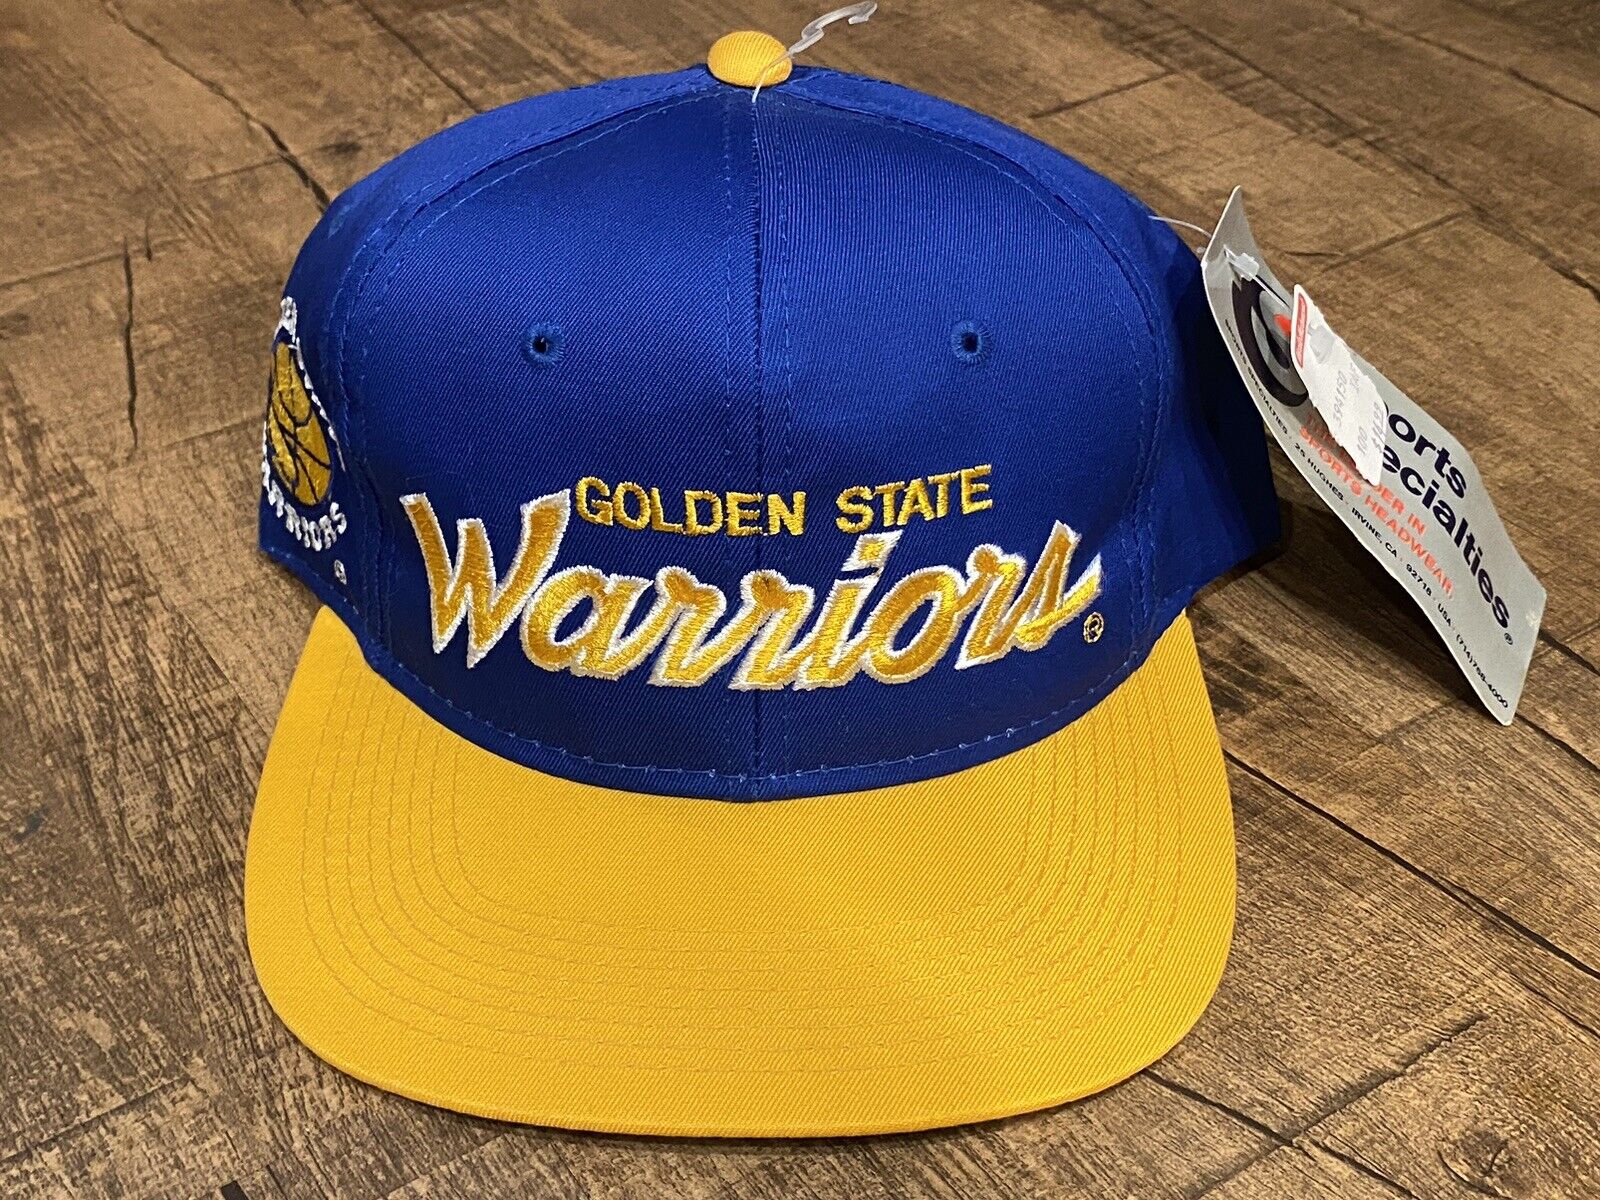 Golden State Warriors Sports Specialties Vintage 90’s Snapback Hat Cap New NWT